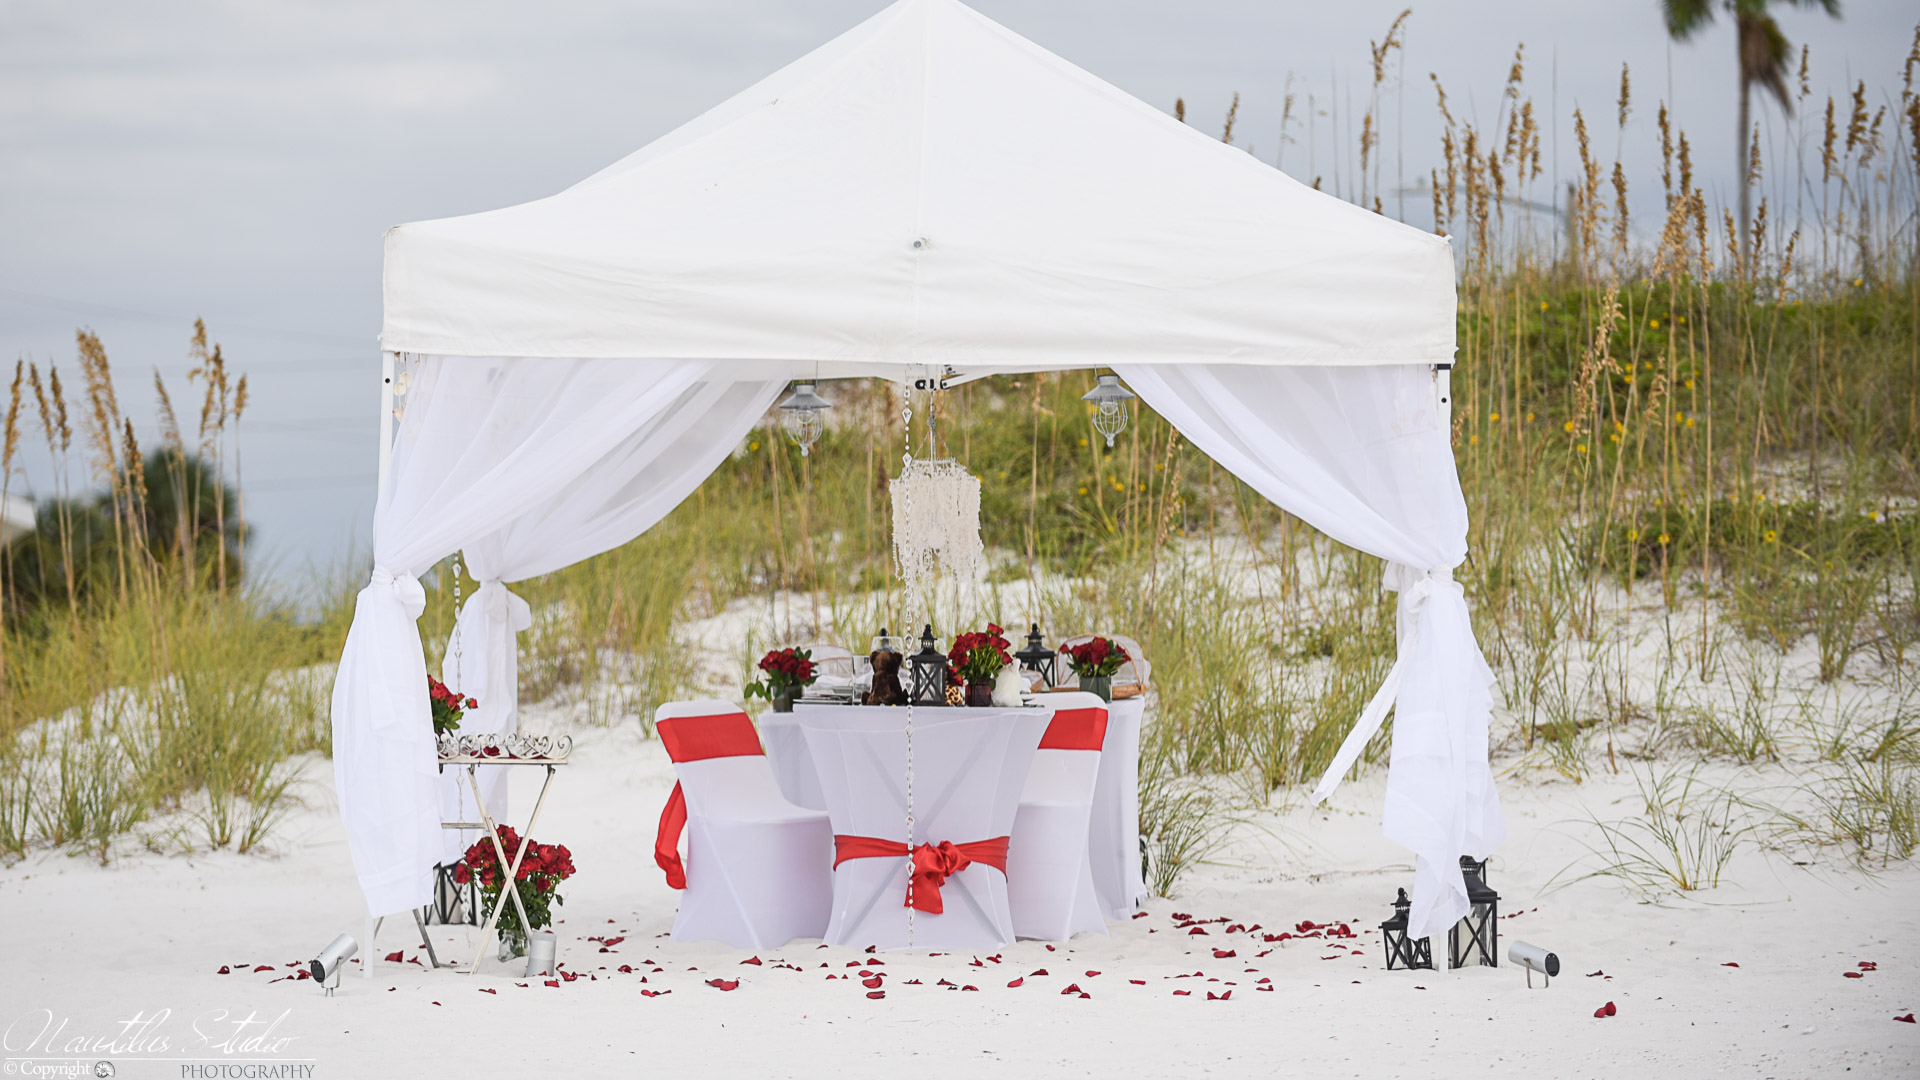 Exclusive beach picnic marriage proposal with tent